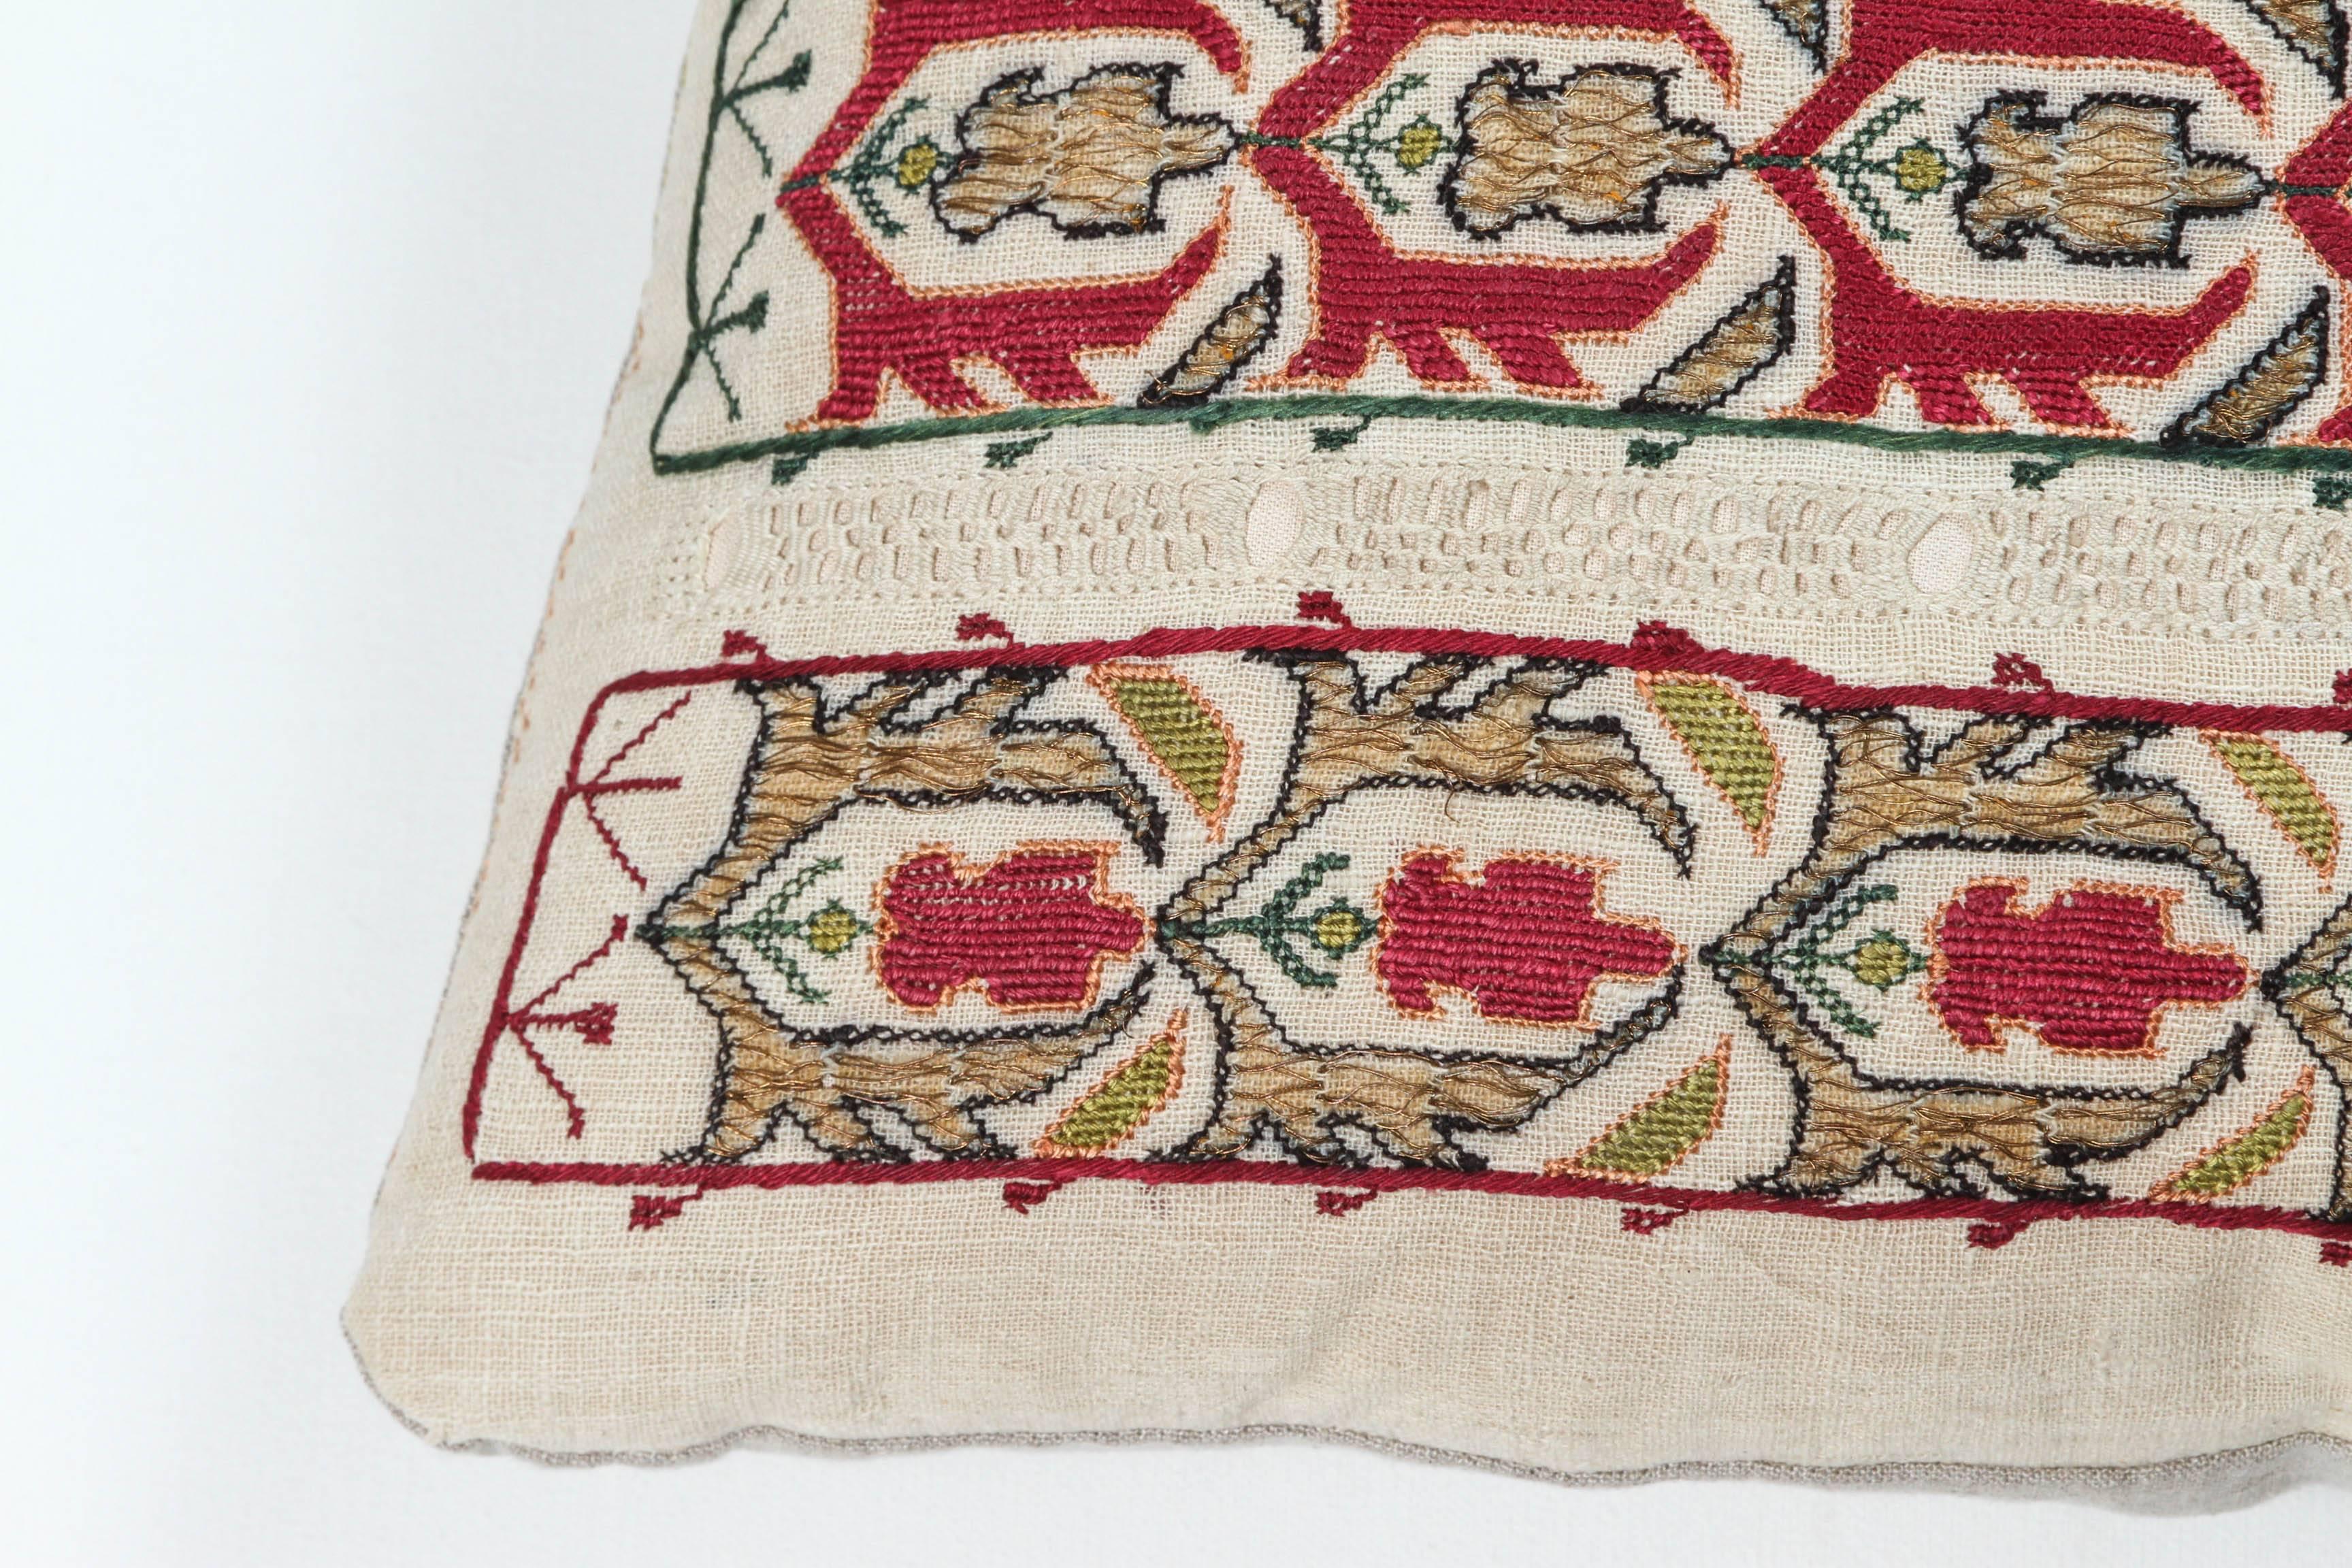 Early 20th century Greek Island (Ottoman Empire) embroidered linen pillow or cushion with silk and metallic gold threads. Pull work on the linen. Crimson red, gold, green, lime green and natural linen color. Natural linen backing, invisible zipper,